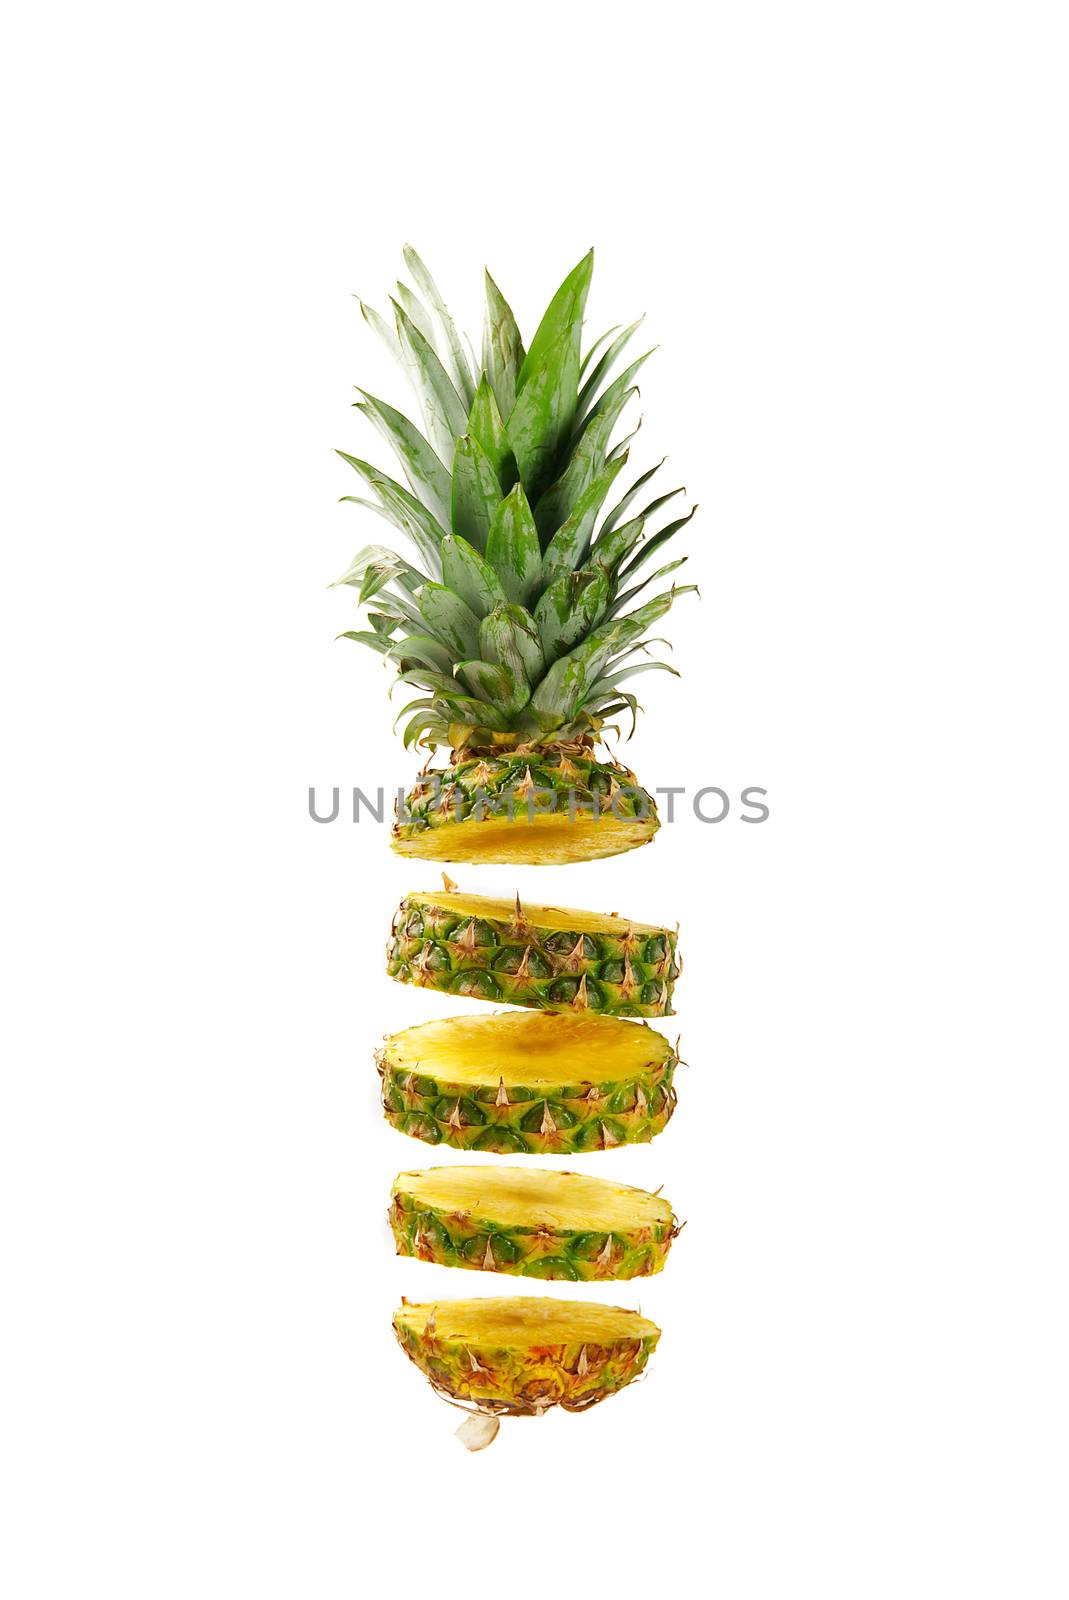 Pineapple fresh ananas. Pineapple sliced, levitates in the air. Concept of summer mood on white background, isolate. Tropical fruit. by PhotoTime